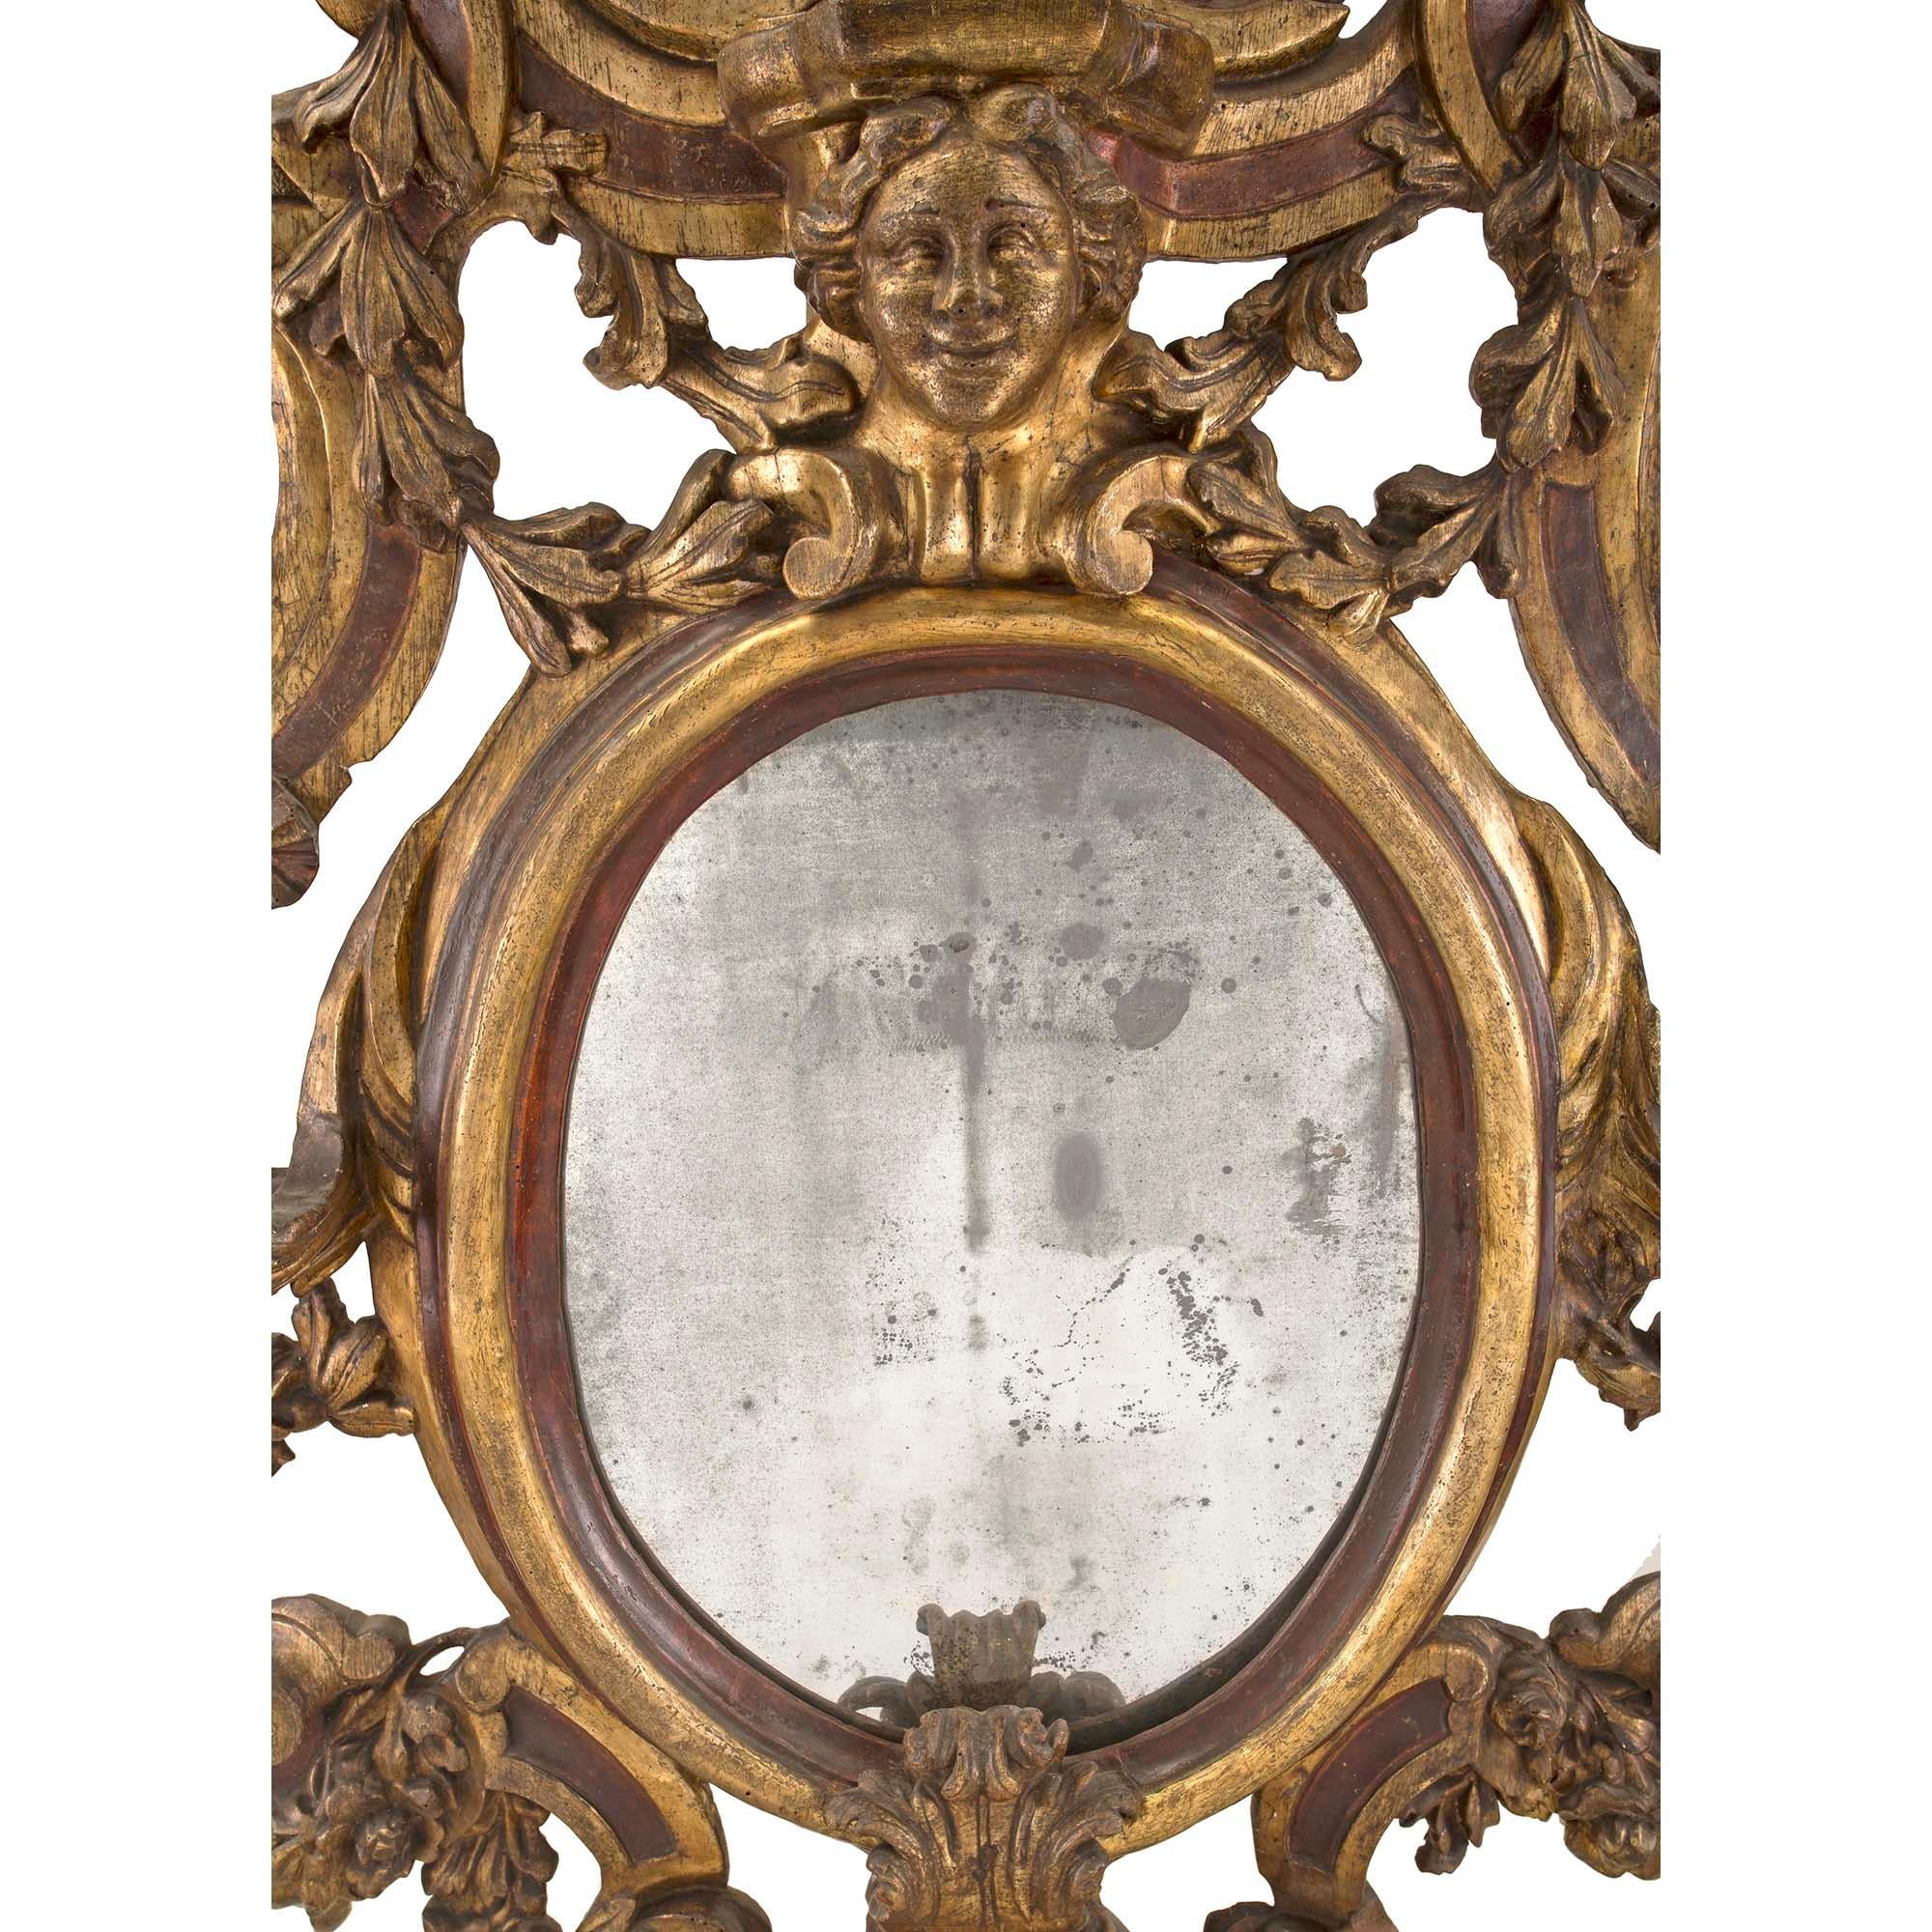 A most impressive Italian 17th century Sicilian Mecca and polychrome oval mirror circa 1650. The original mirror plate is framed within an oval mottled warm polychrome and Mecca border. The unique and extremely decorative frame displays striking